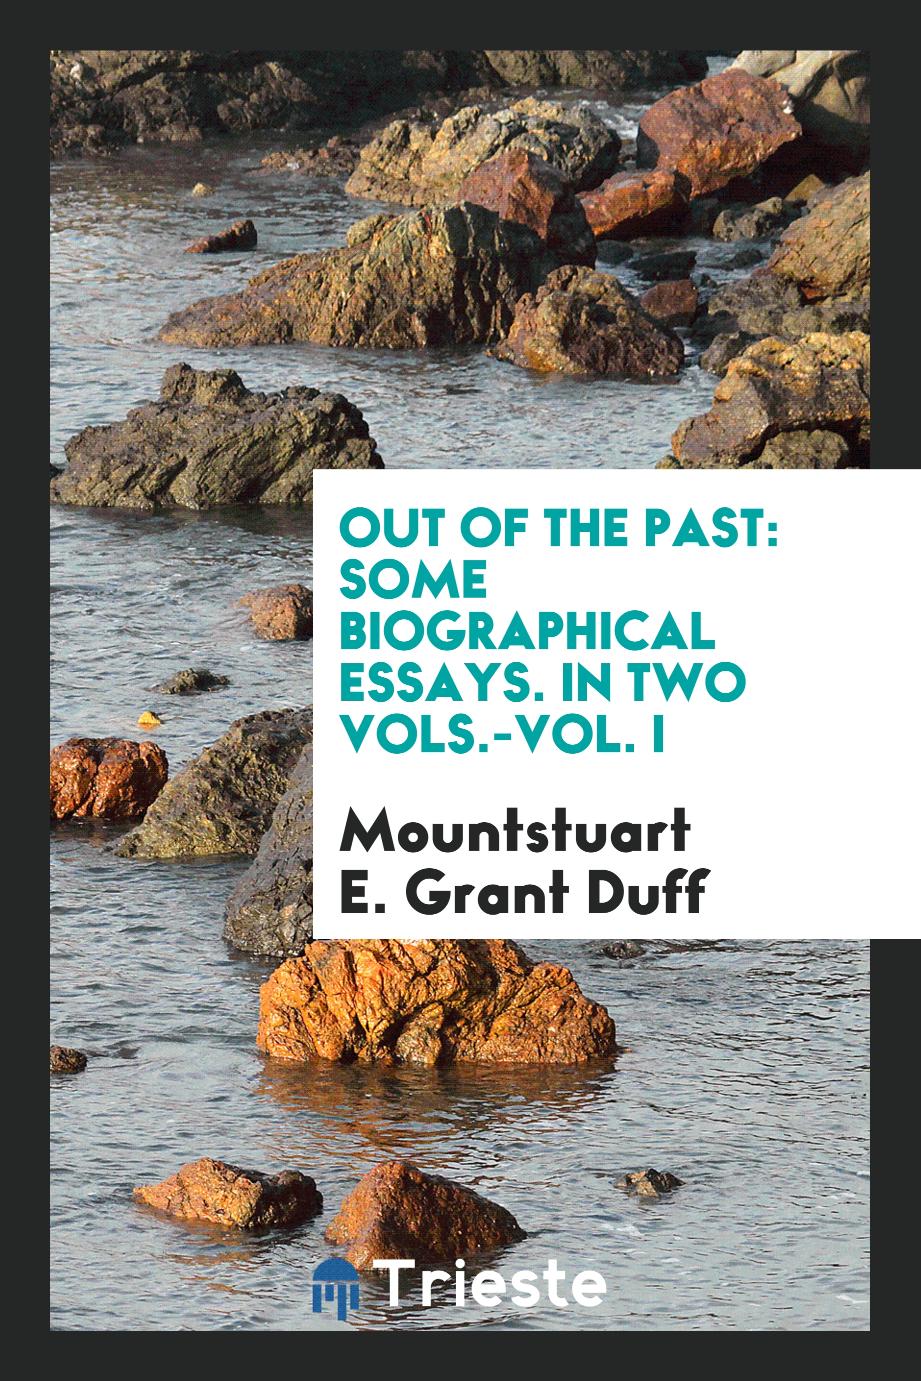 Out of the past: some biographical essays. In two Vols.-Vol. I